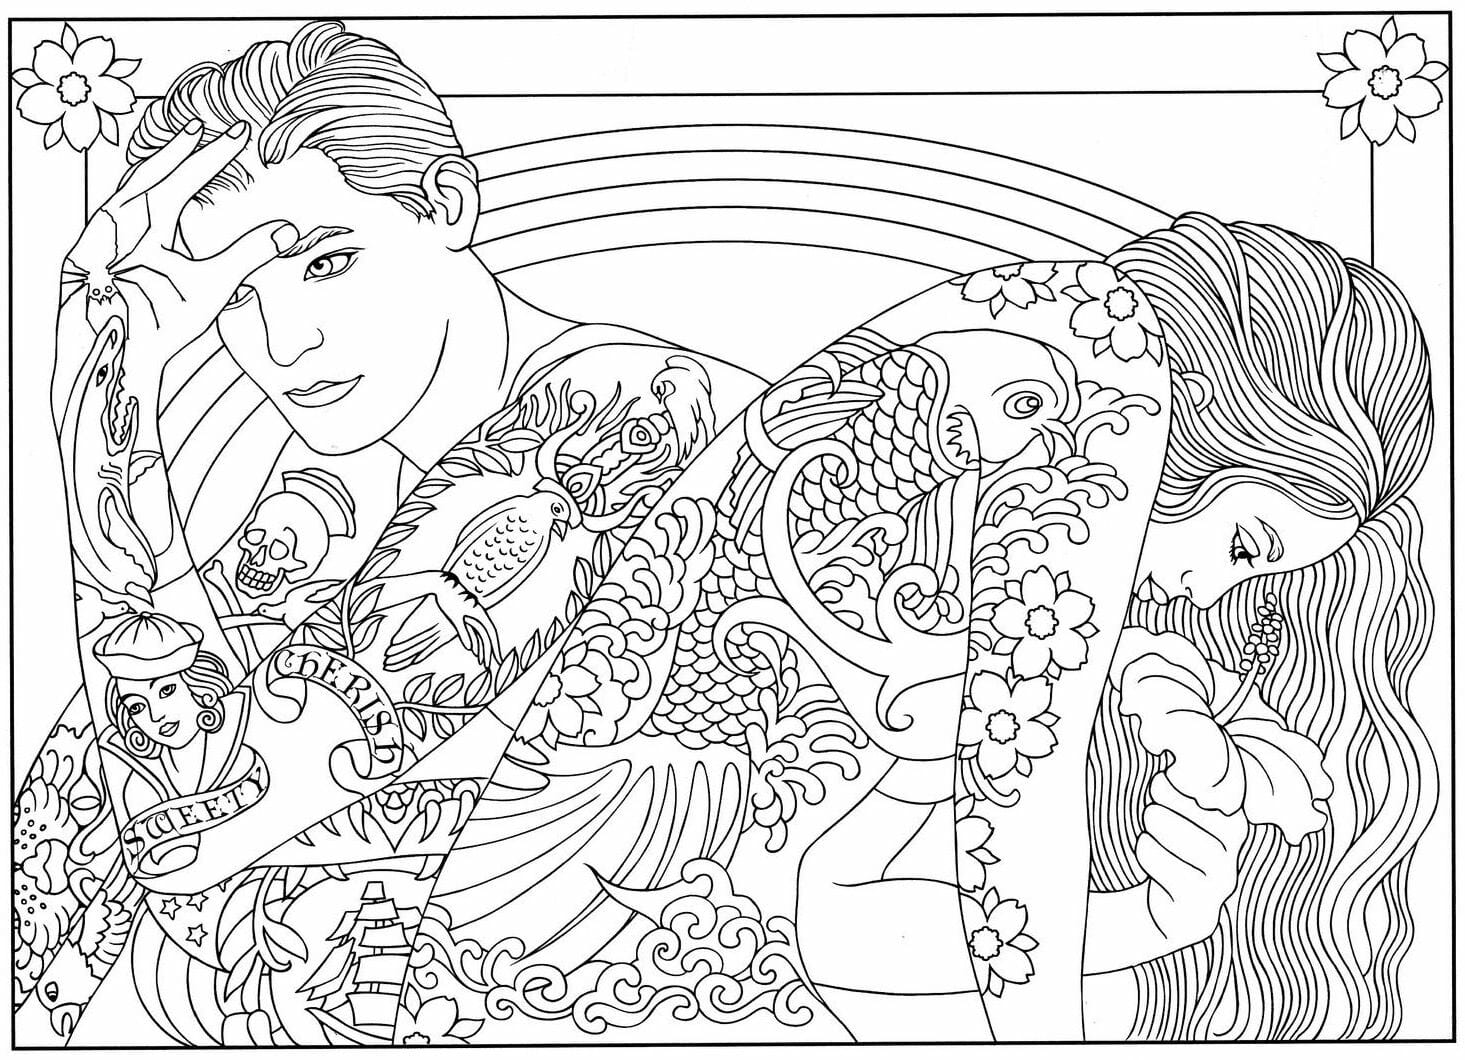 Featured image of post Free Printable Tattoo Coloring Pages For Adults Only / Getcolorings.com has more than 600 thousand printable coloring pages on sixteen thousand topics including animals, flowers, cartoons, cars, nature and many many more.